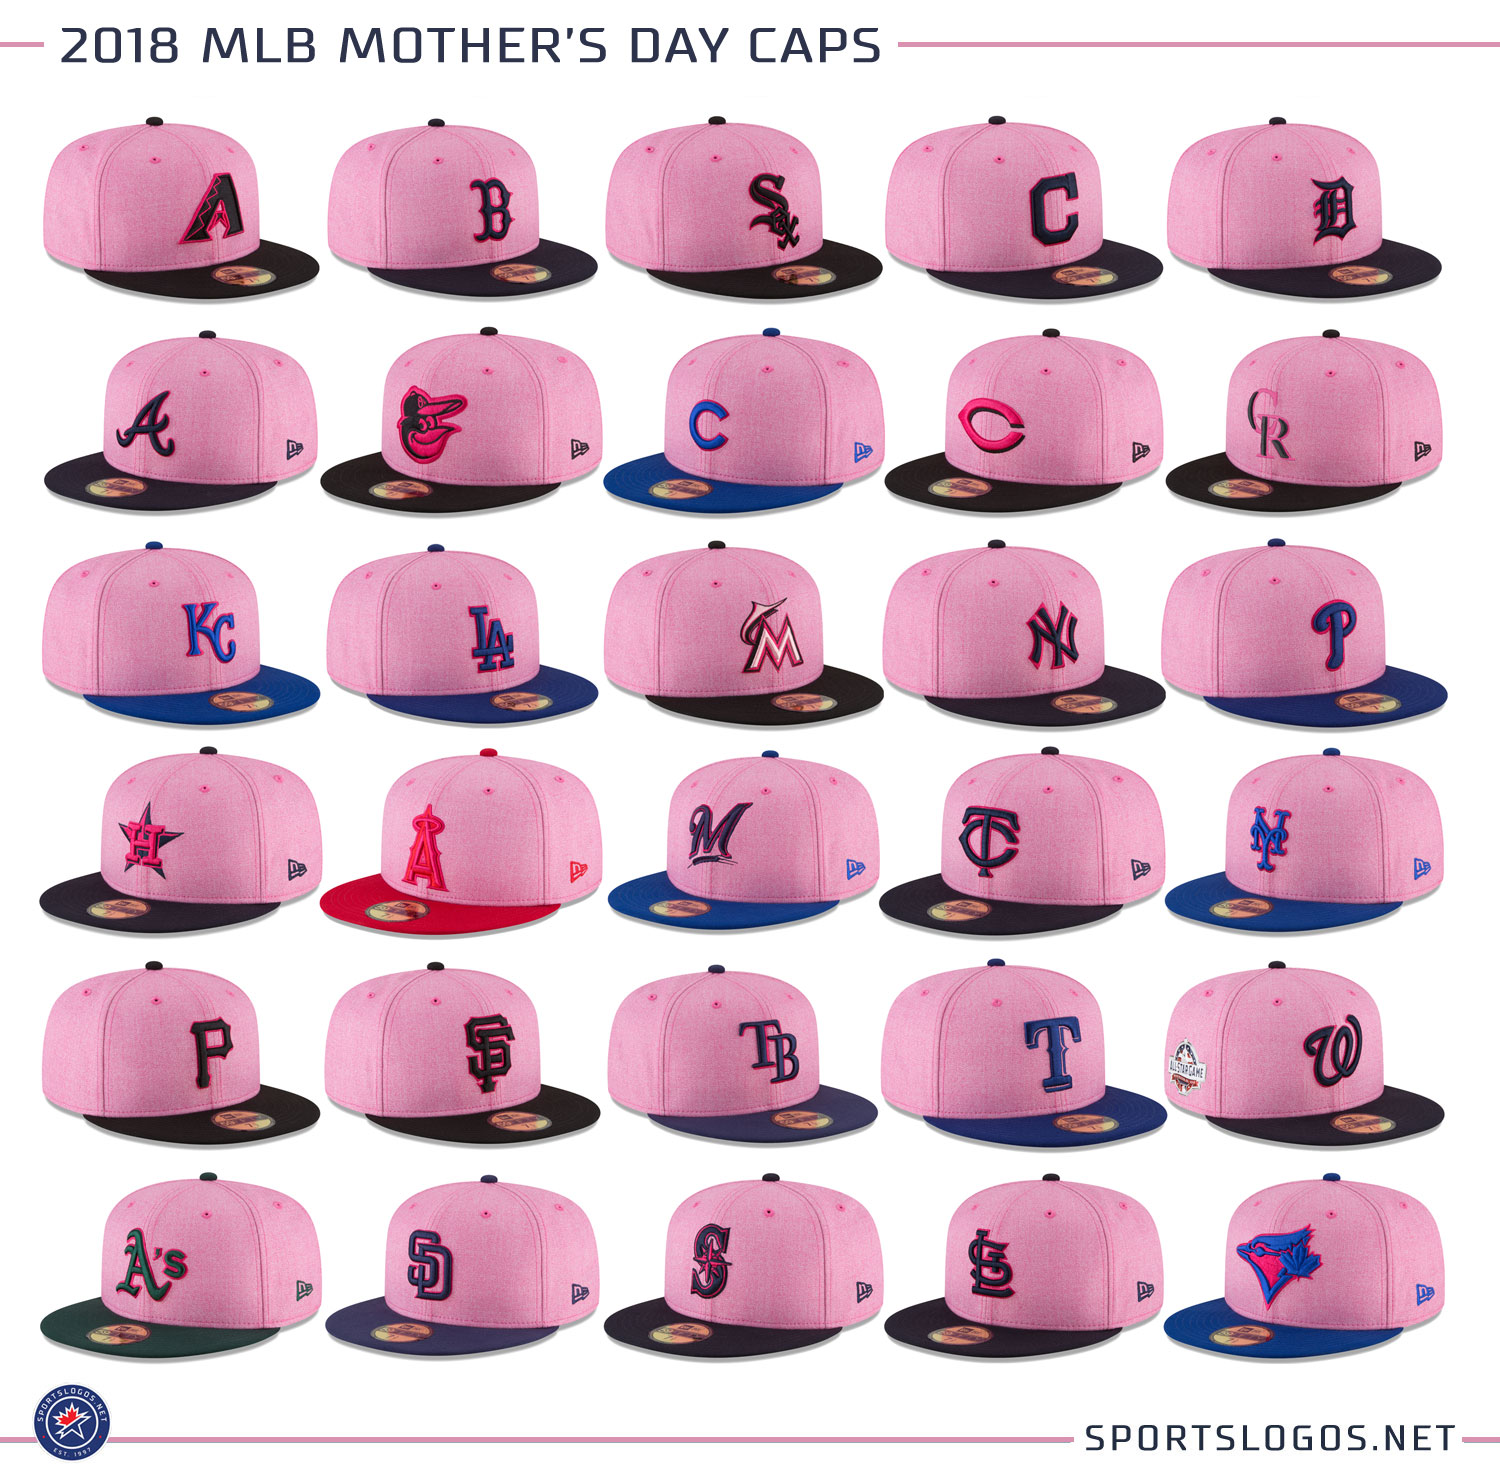 All MLB Teams Wearing Pink Caps, Ribbons and More Today for Mother's Day –  SportsLogos.Net News